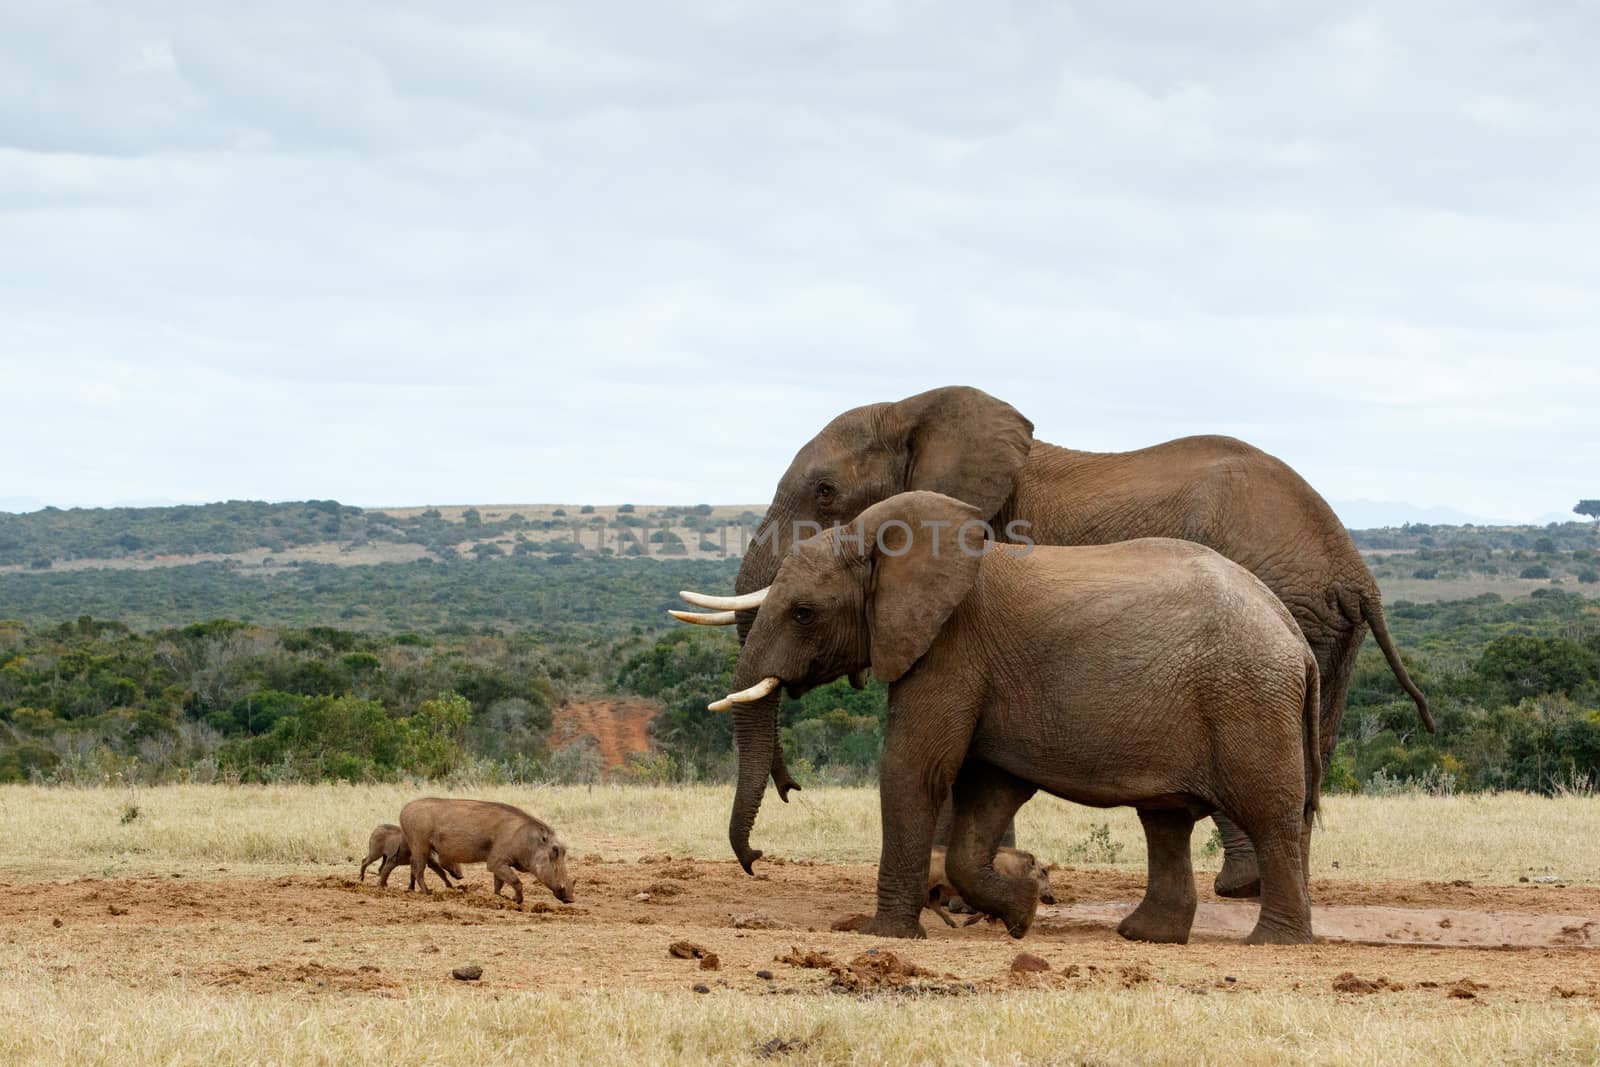 Big Brothers African Bush Elephants - The African bush elephant is the larger of the two species of African elephant. Both it and the African forest elephant have in the past been classified as a single species.